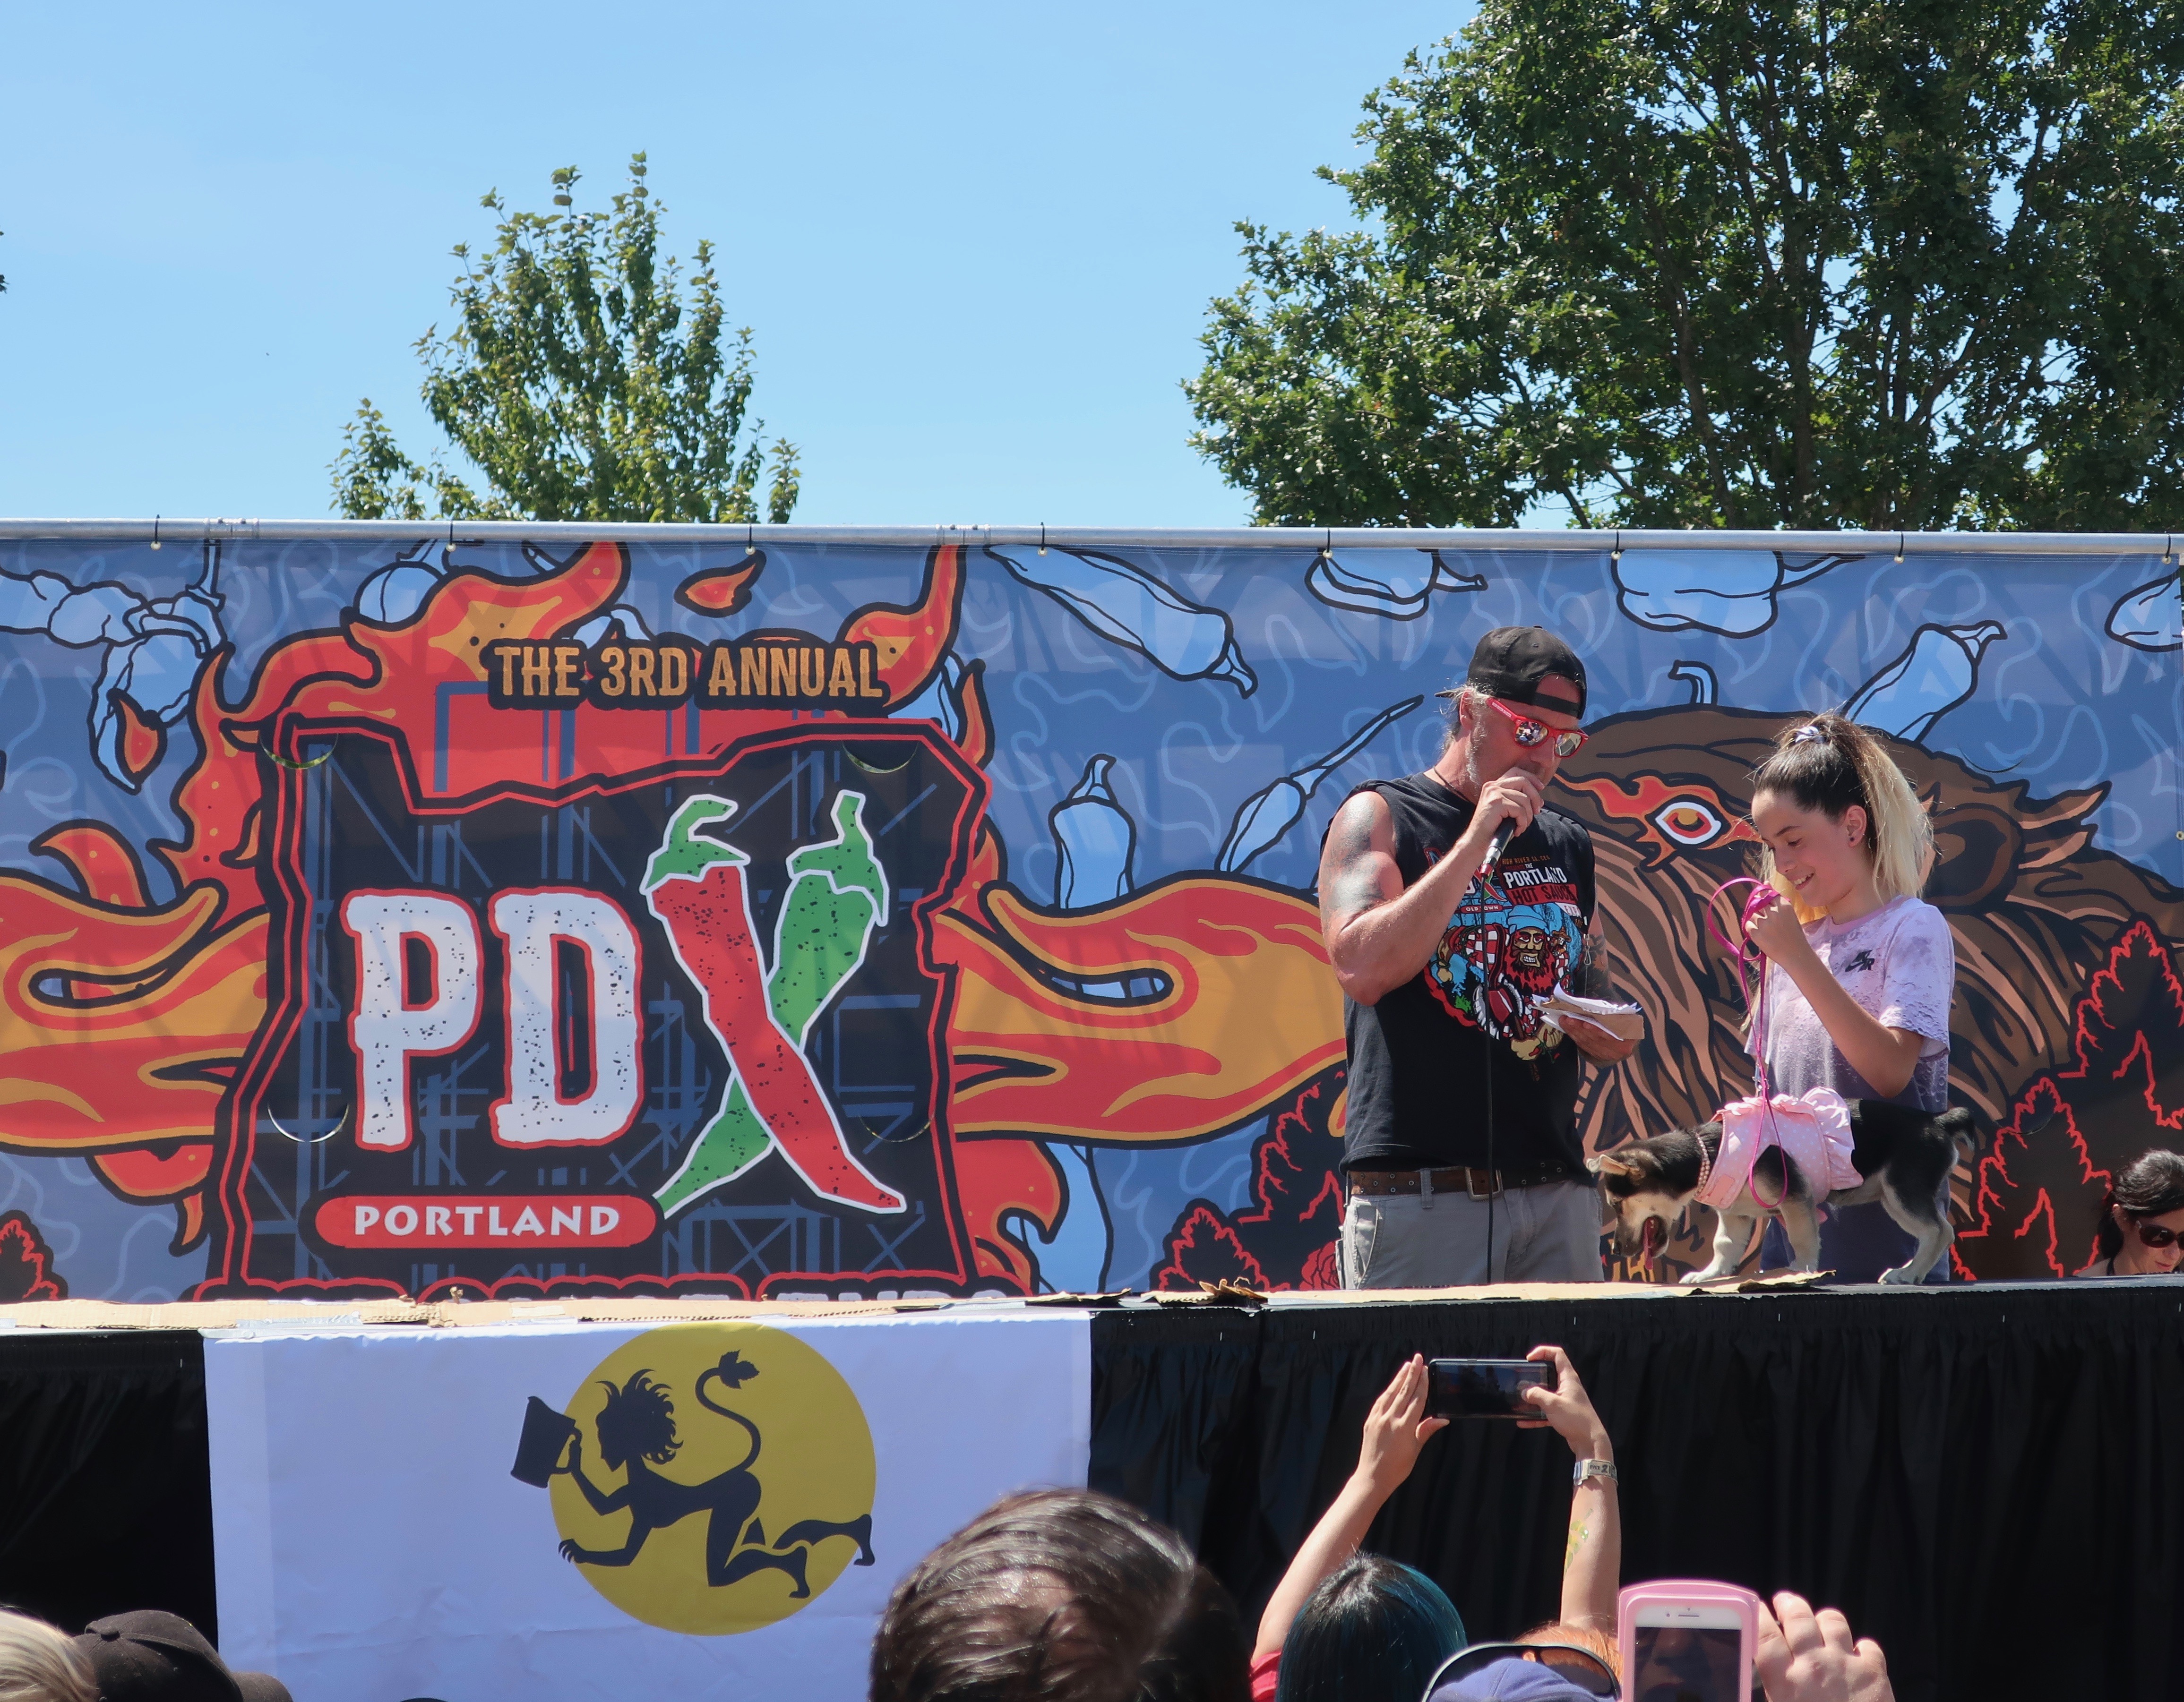 The annual Chihuahua Beauty Pageant is very popular each year at the PDX Hot Sauce Expo in Portland, Oregon.